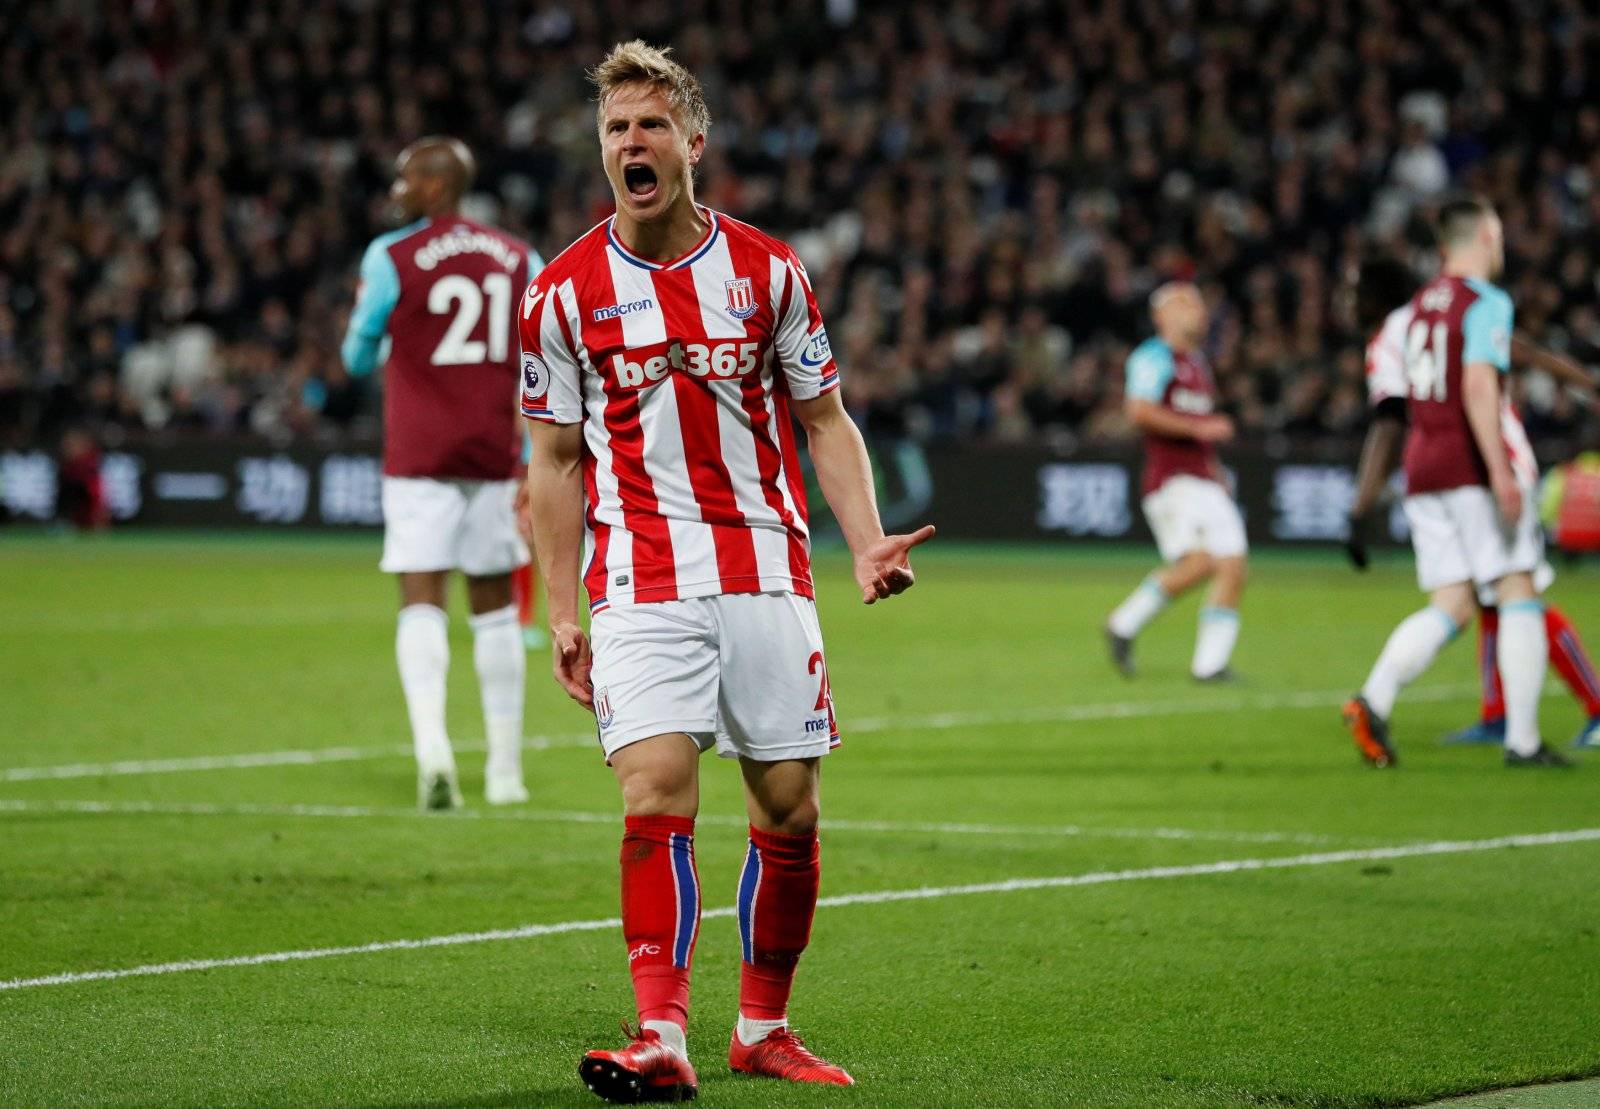 Stoke fans call for Moritz Bauer to return to the starting XI - Ticker